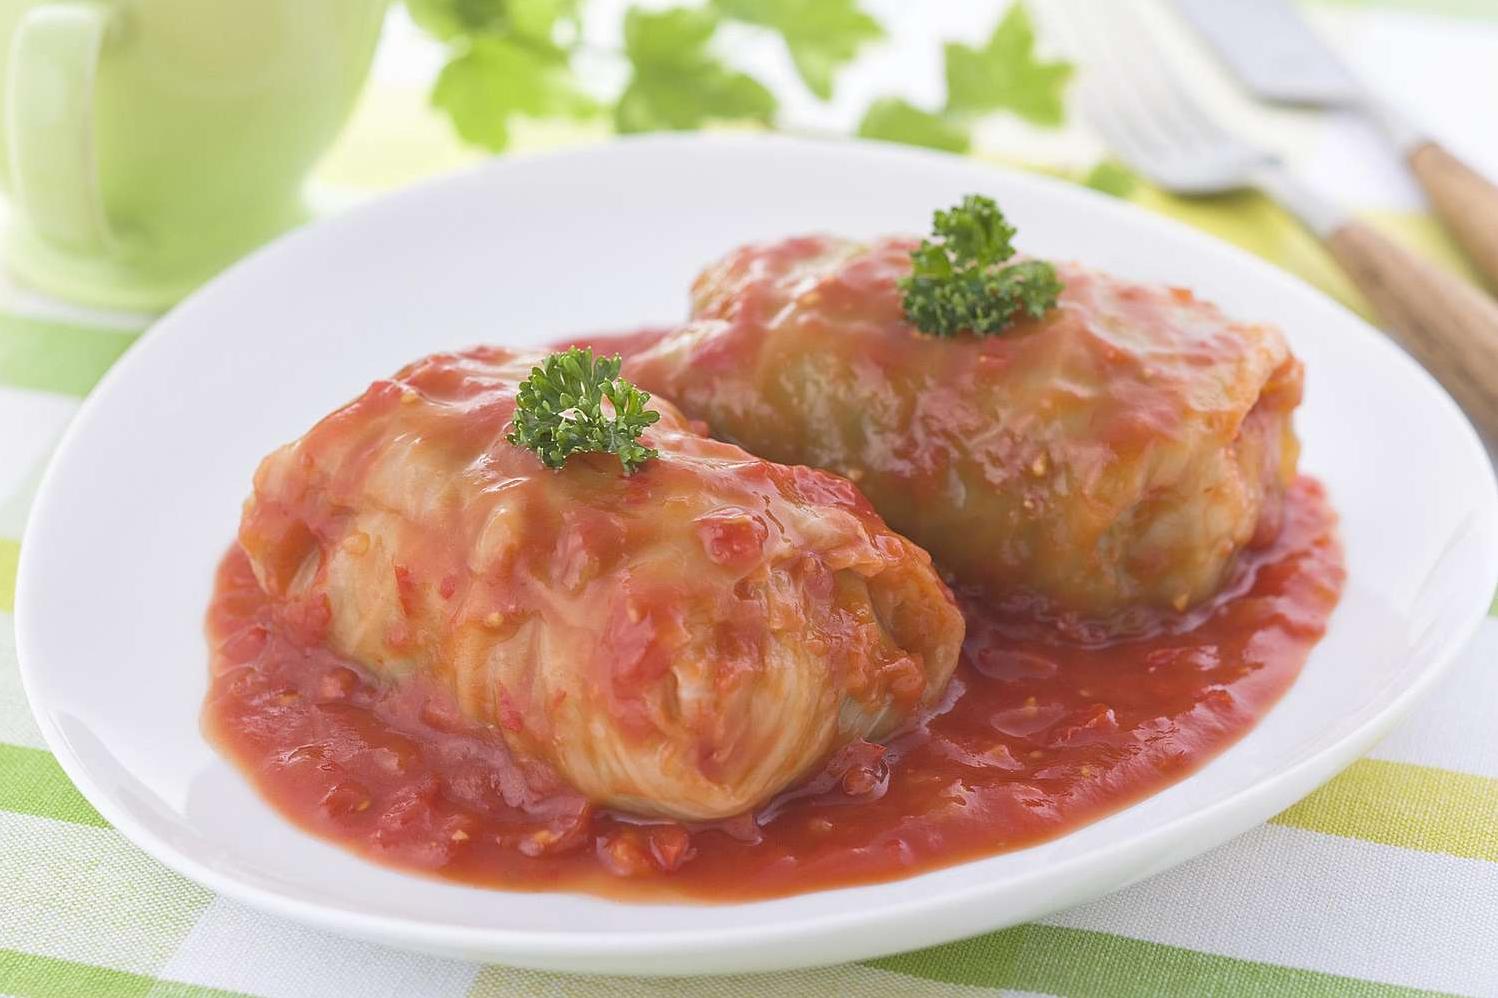  Our cabbage rolls are packed with flavour and make a great comfort food for cold winter nights.